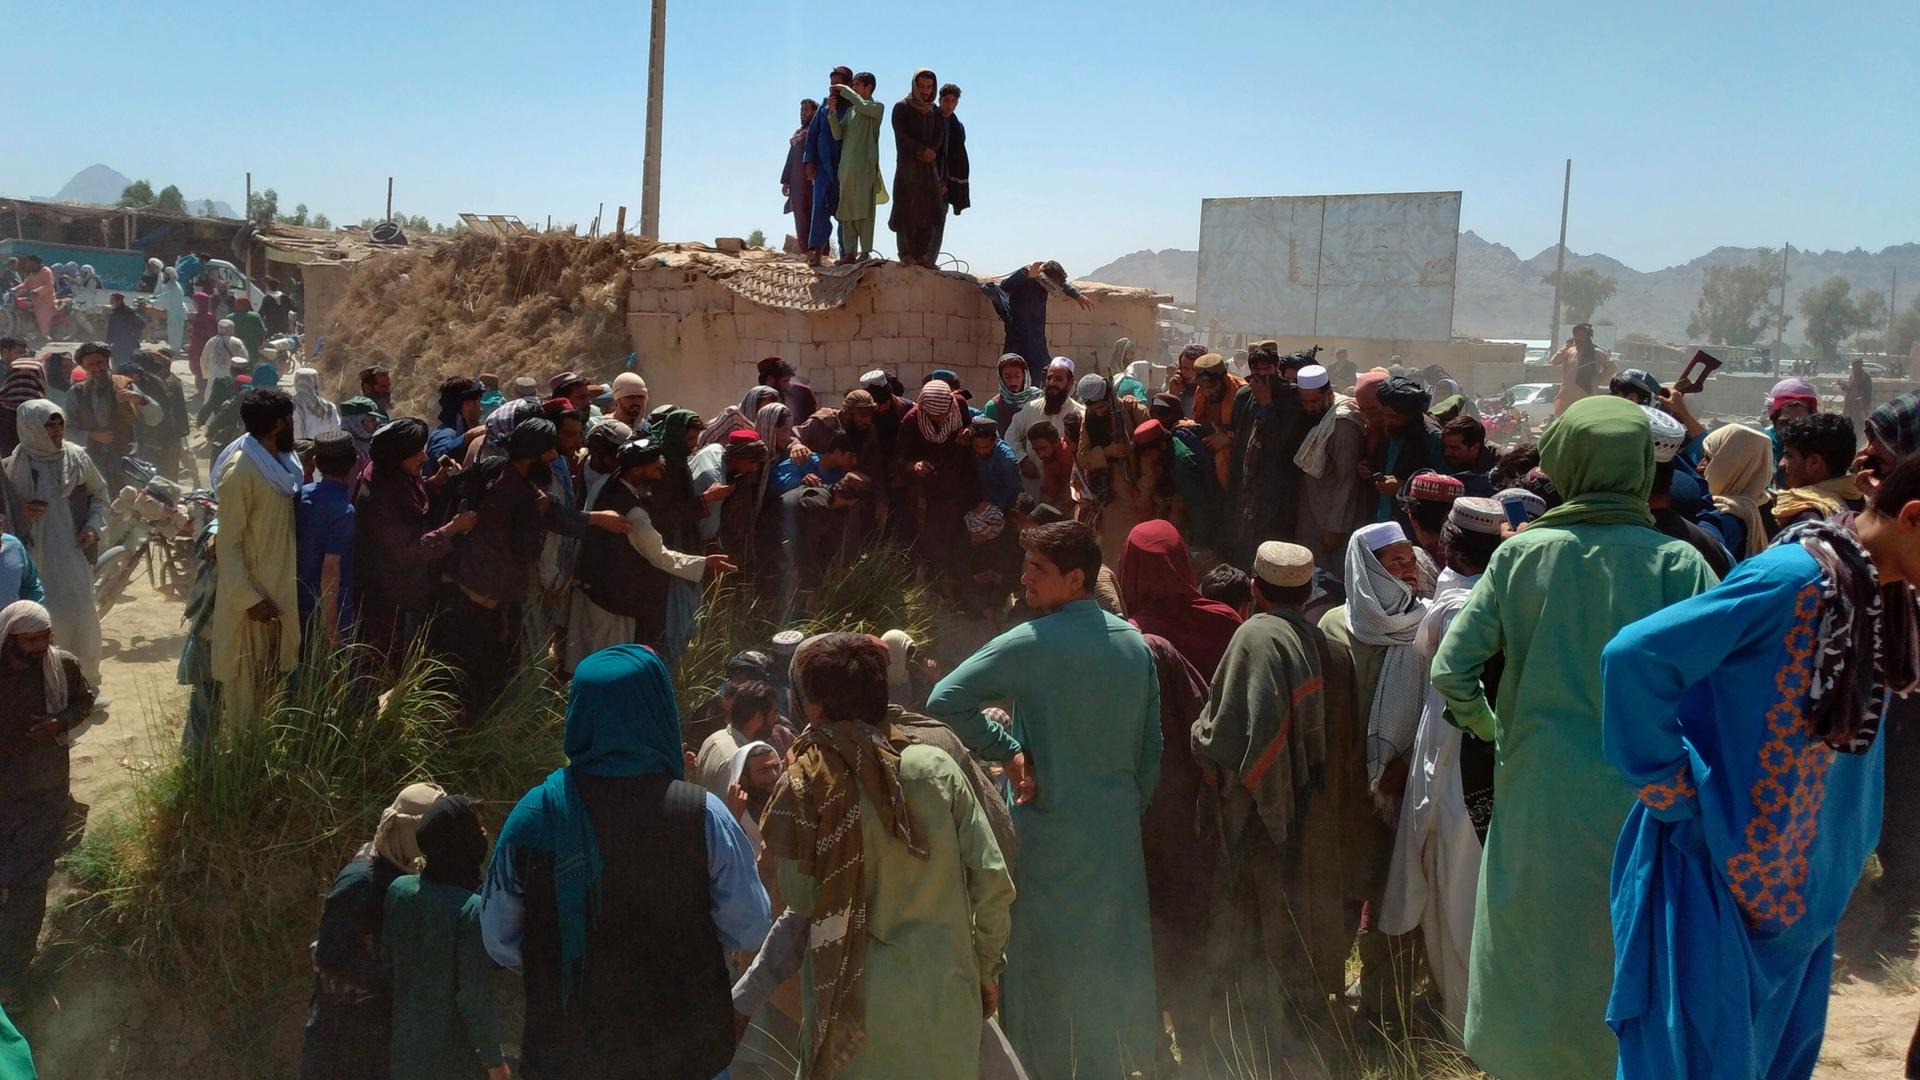 Taliban fighters and Afghans gather around the body of a member of the security forces who was killed